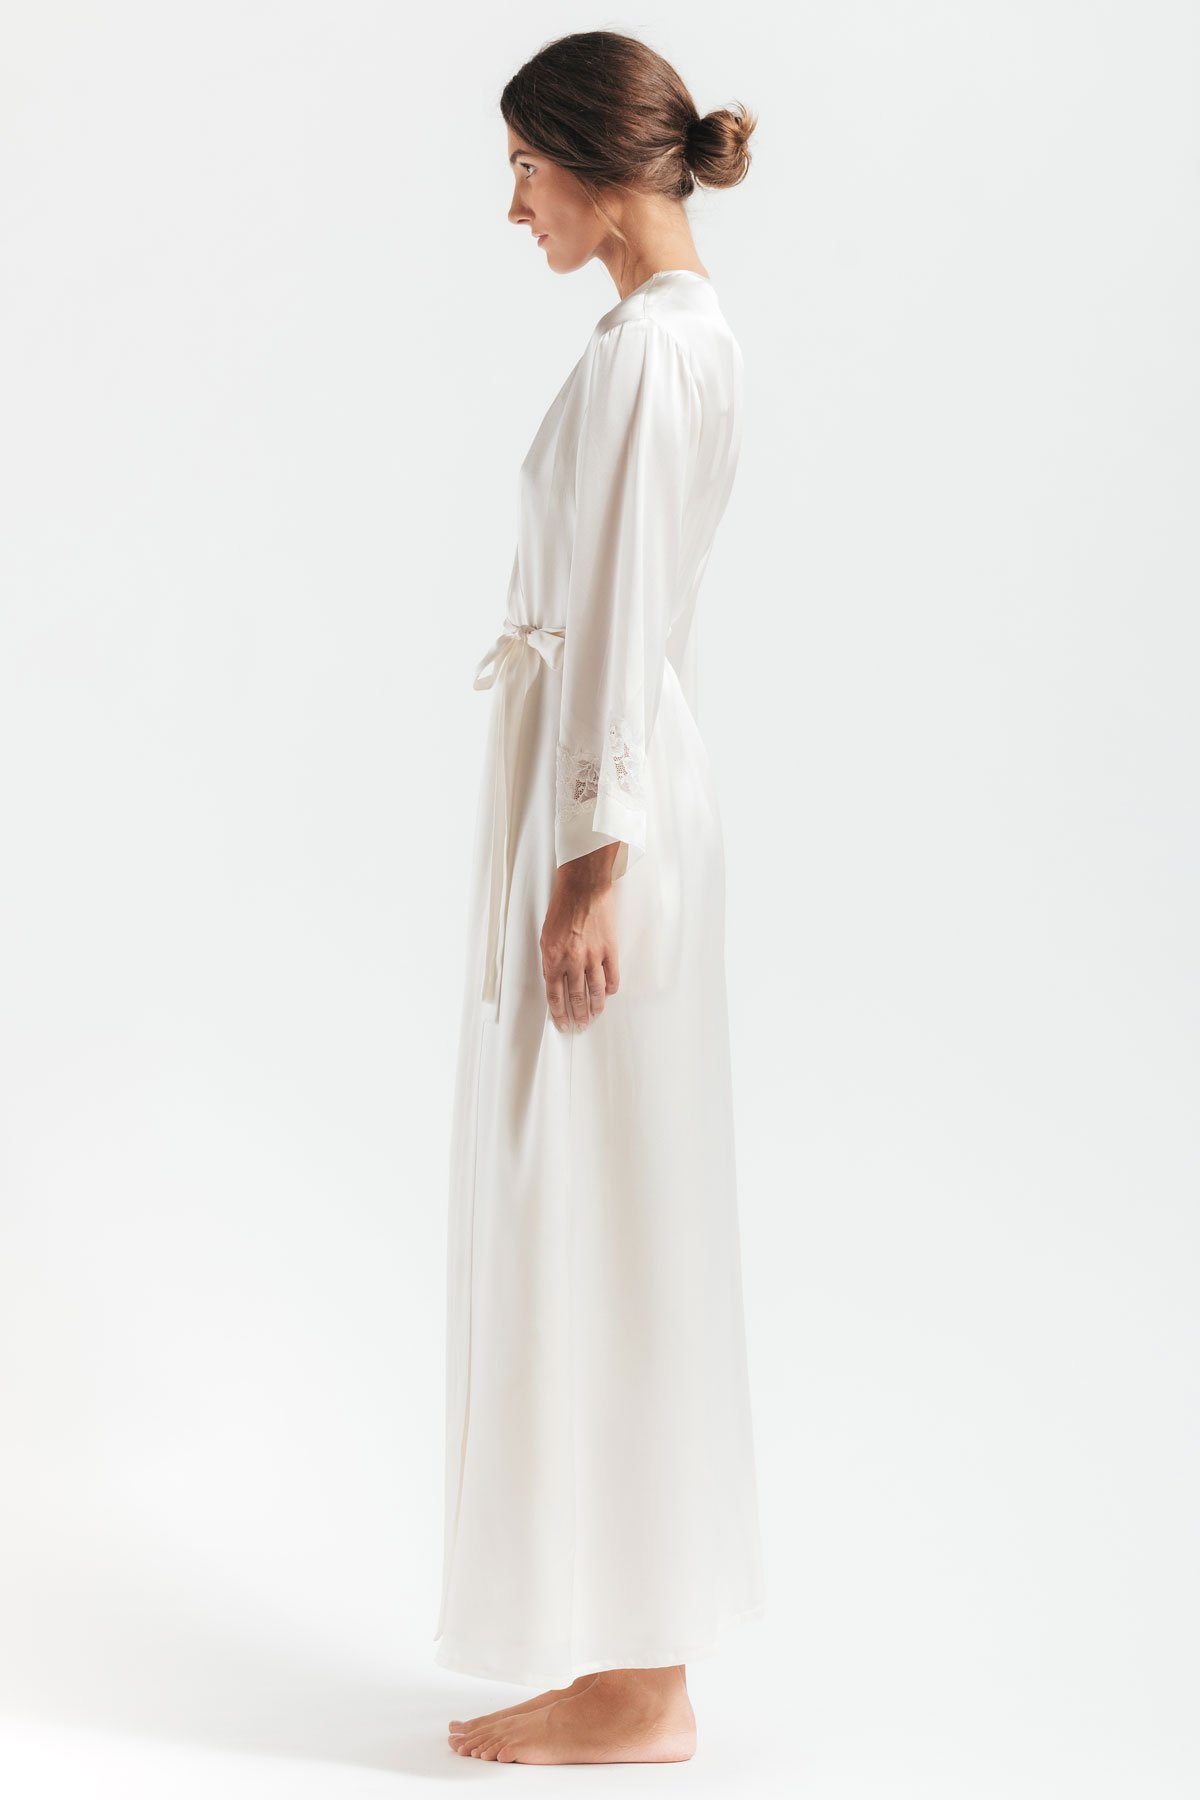 Morgan Long Silk Robe  Available in White, Black or Champagne – NK IMODE